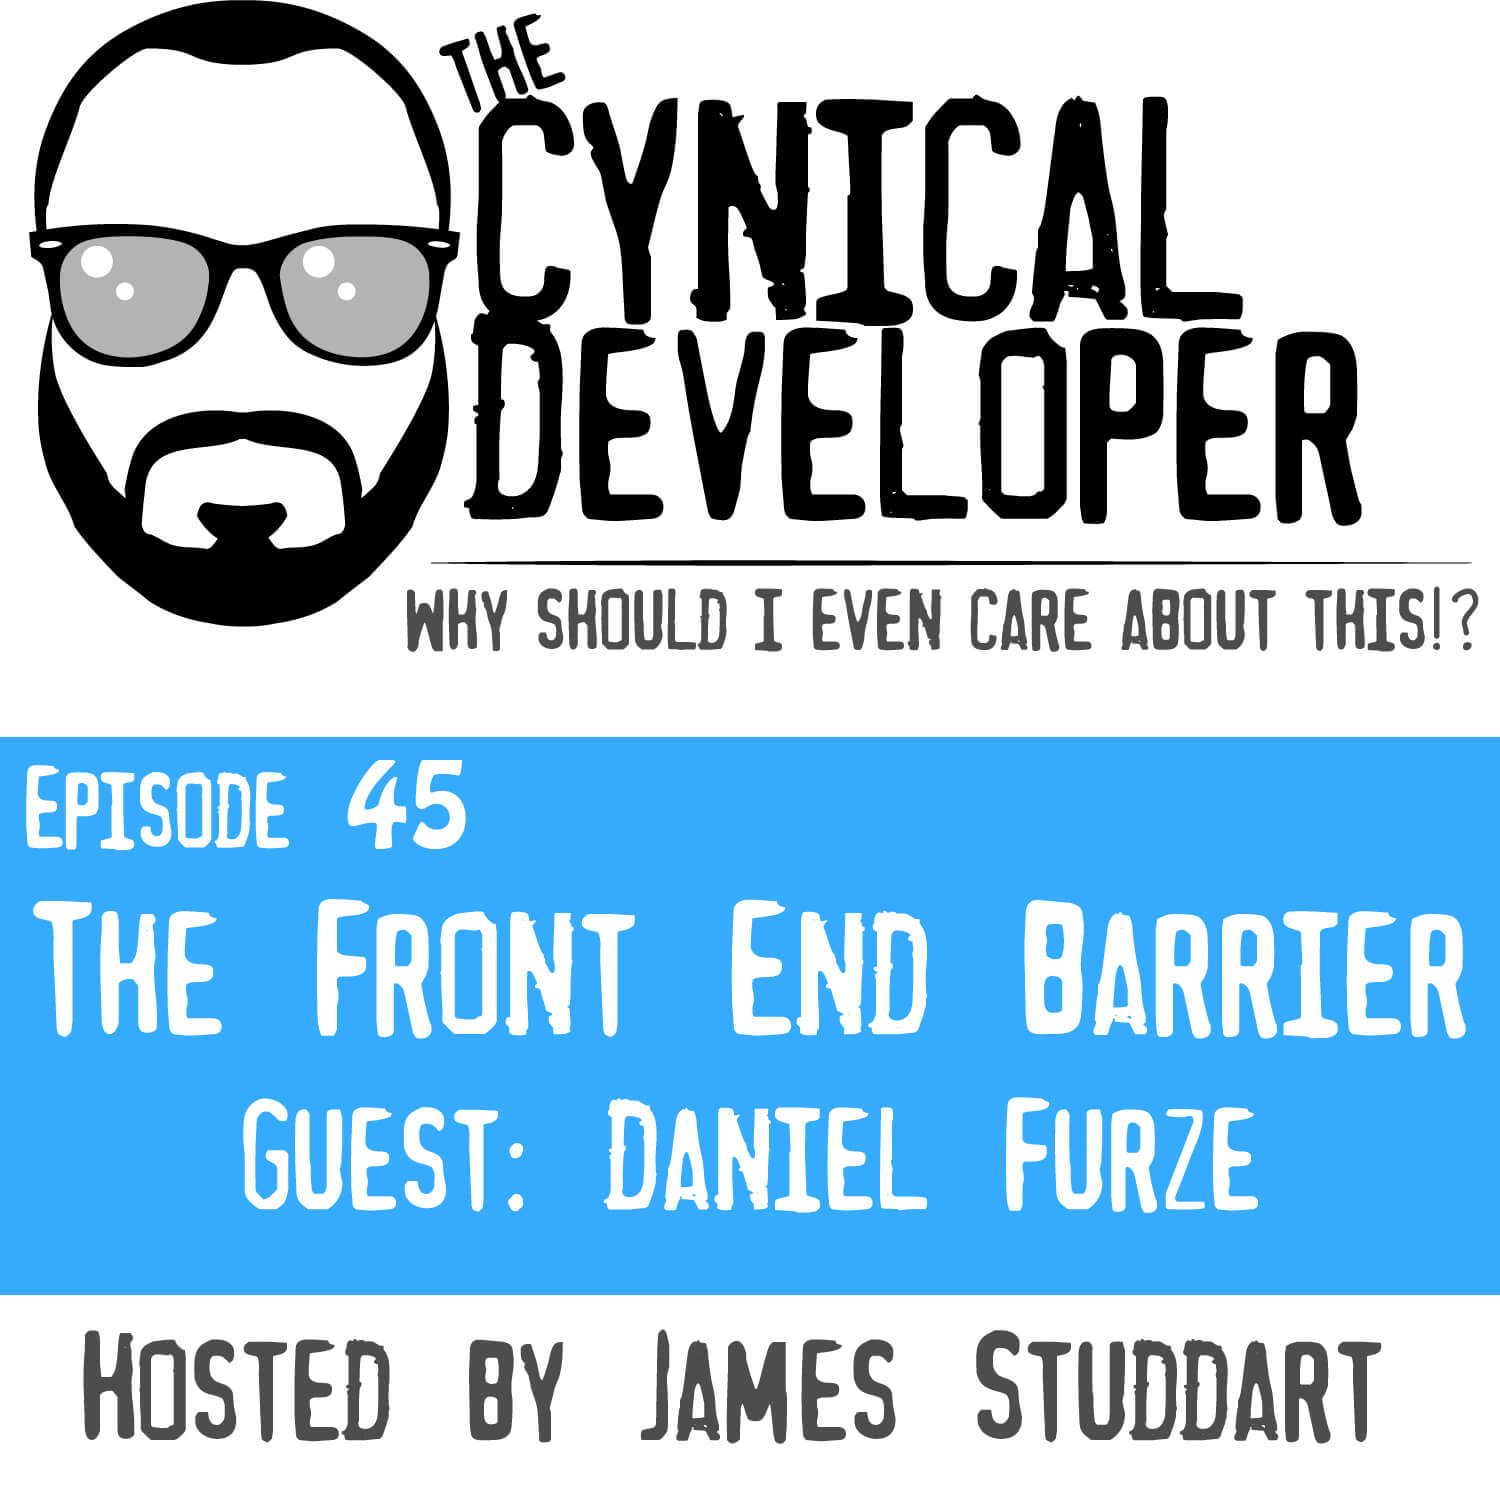 Episode 45 - The front end barrier